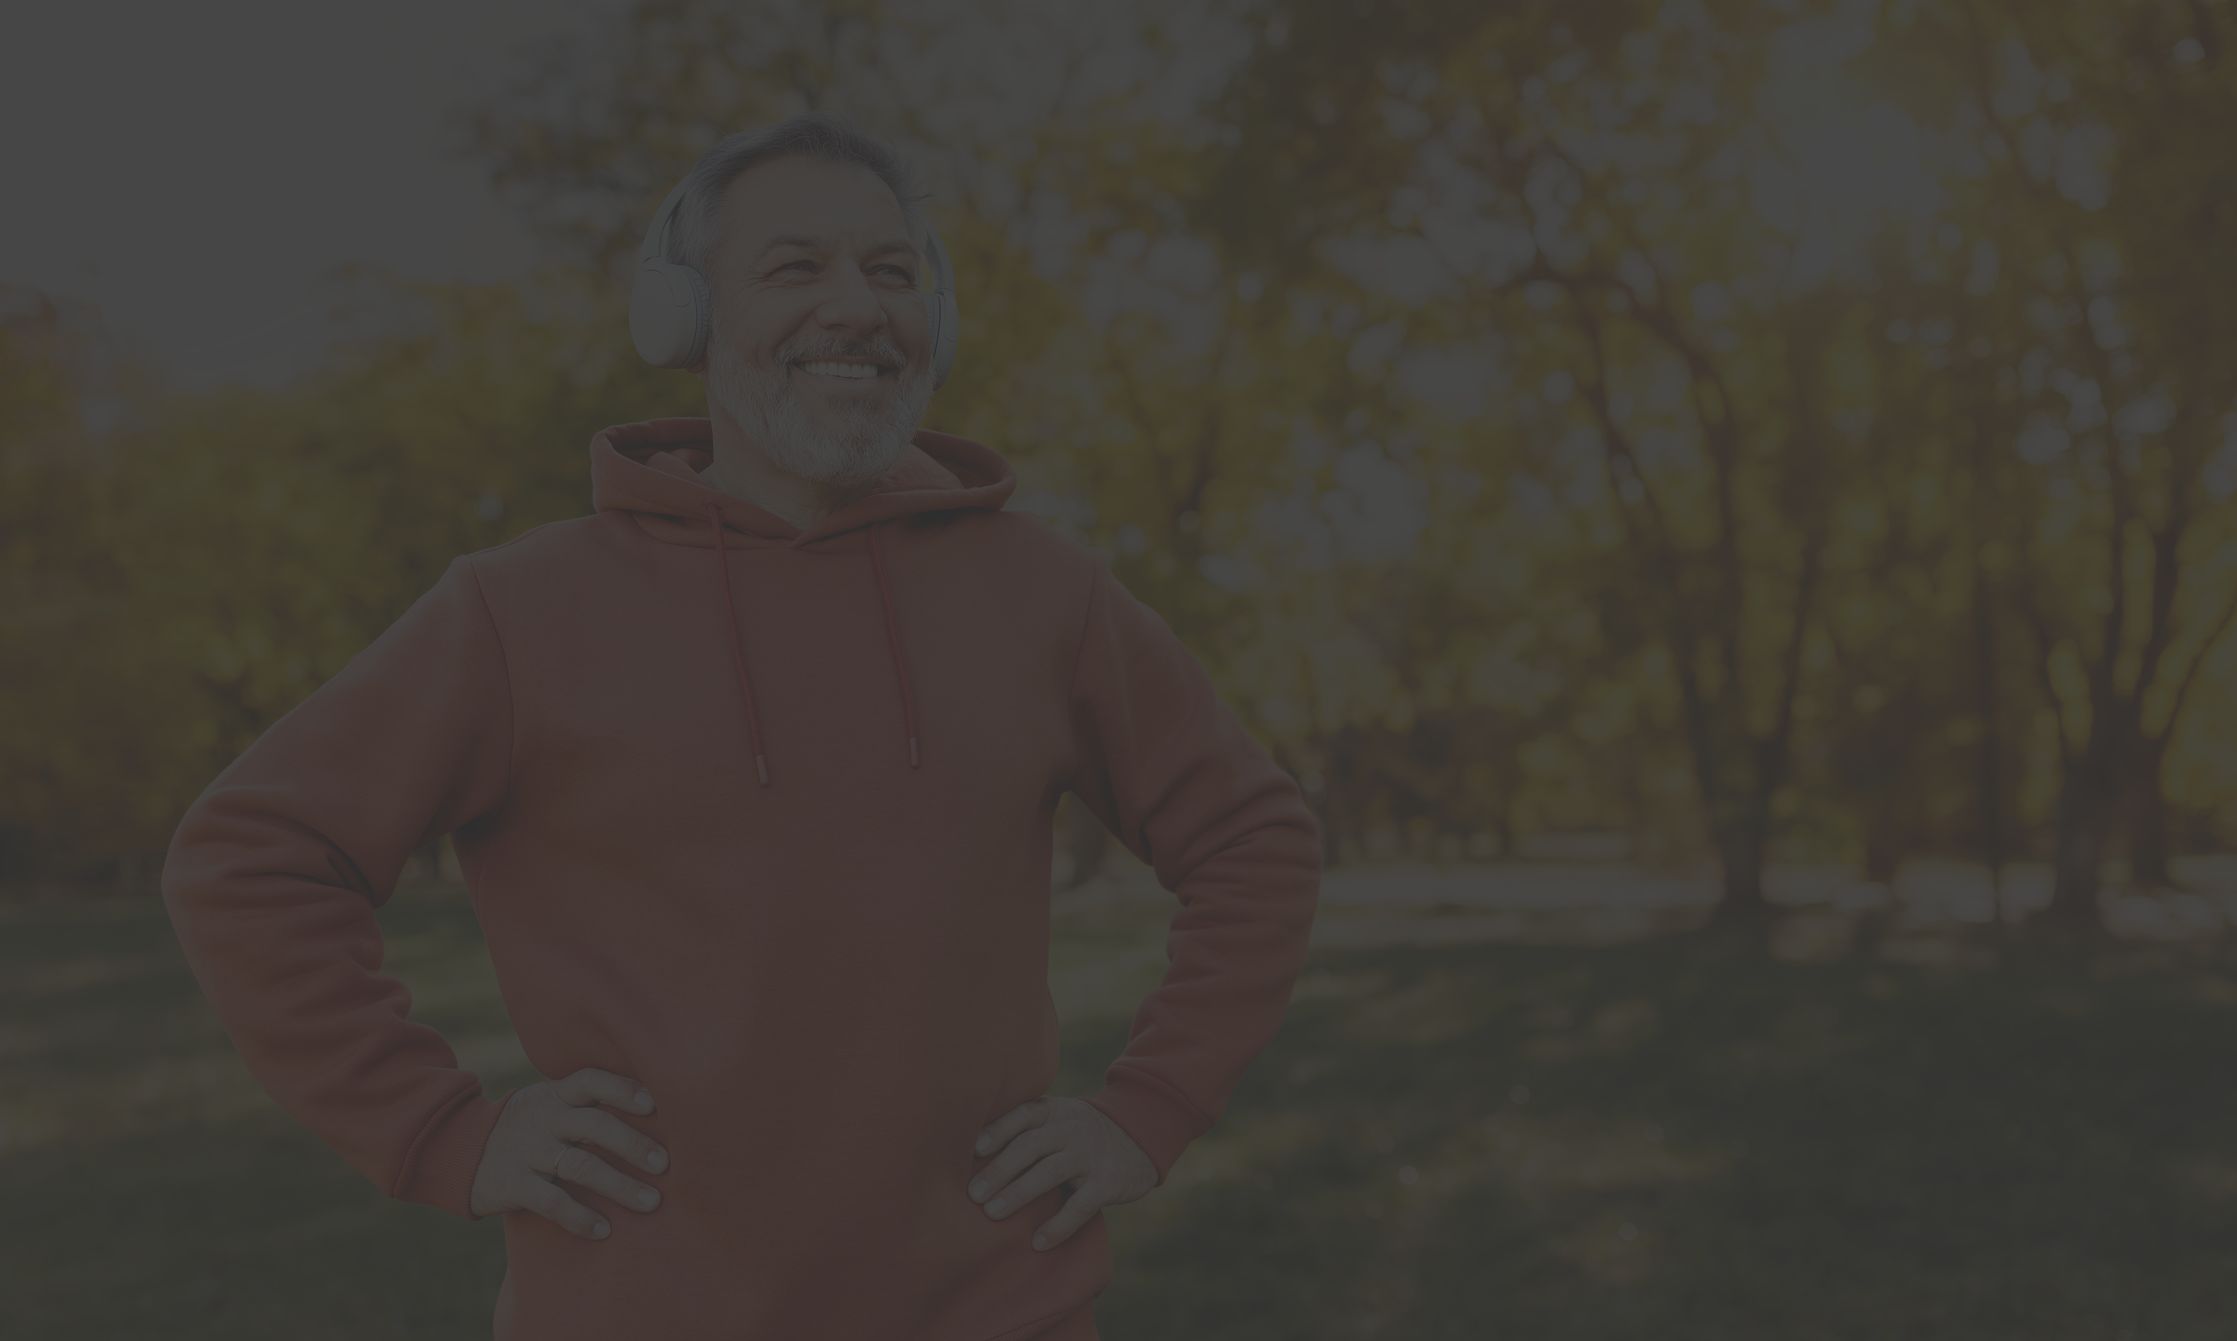 a smiling middle aged Hispanic man with a beard wears earphones and a red sweatshirt as he gets ready to exercise outdoors in a park